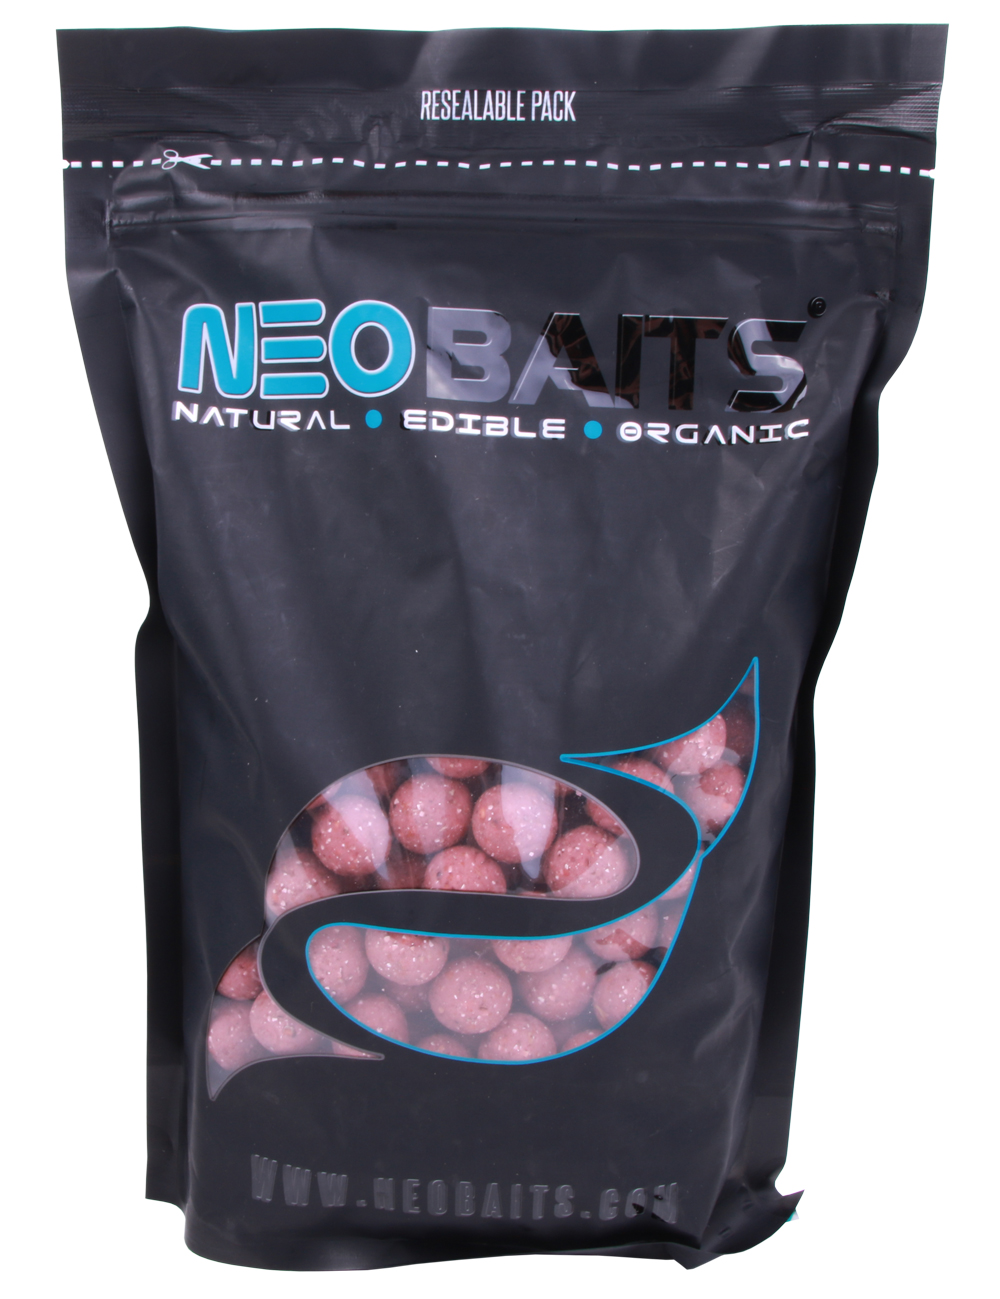 Neo Baits Readymades 20mm 1kg - Spicy Fish